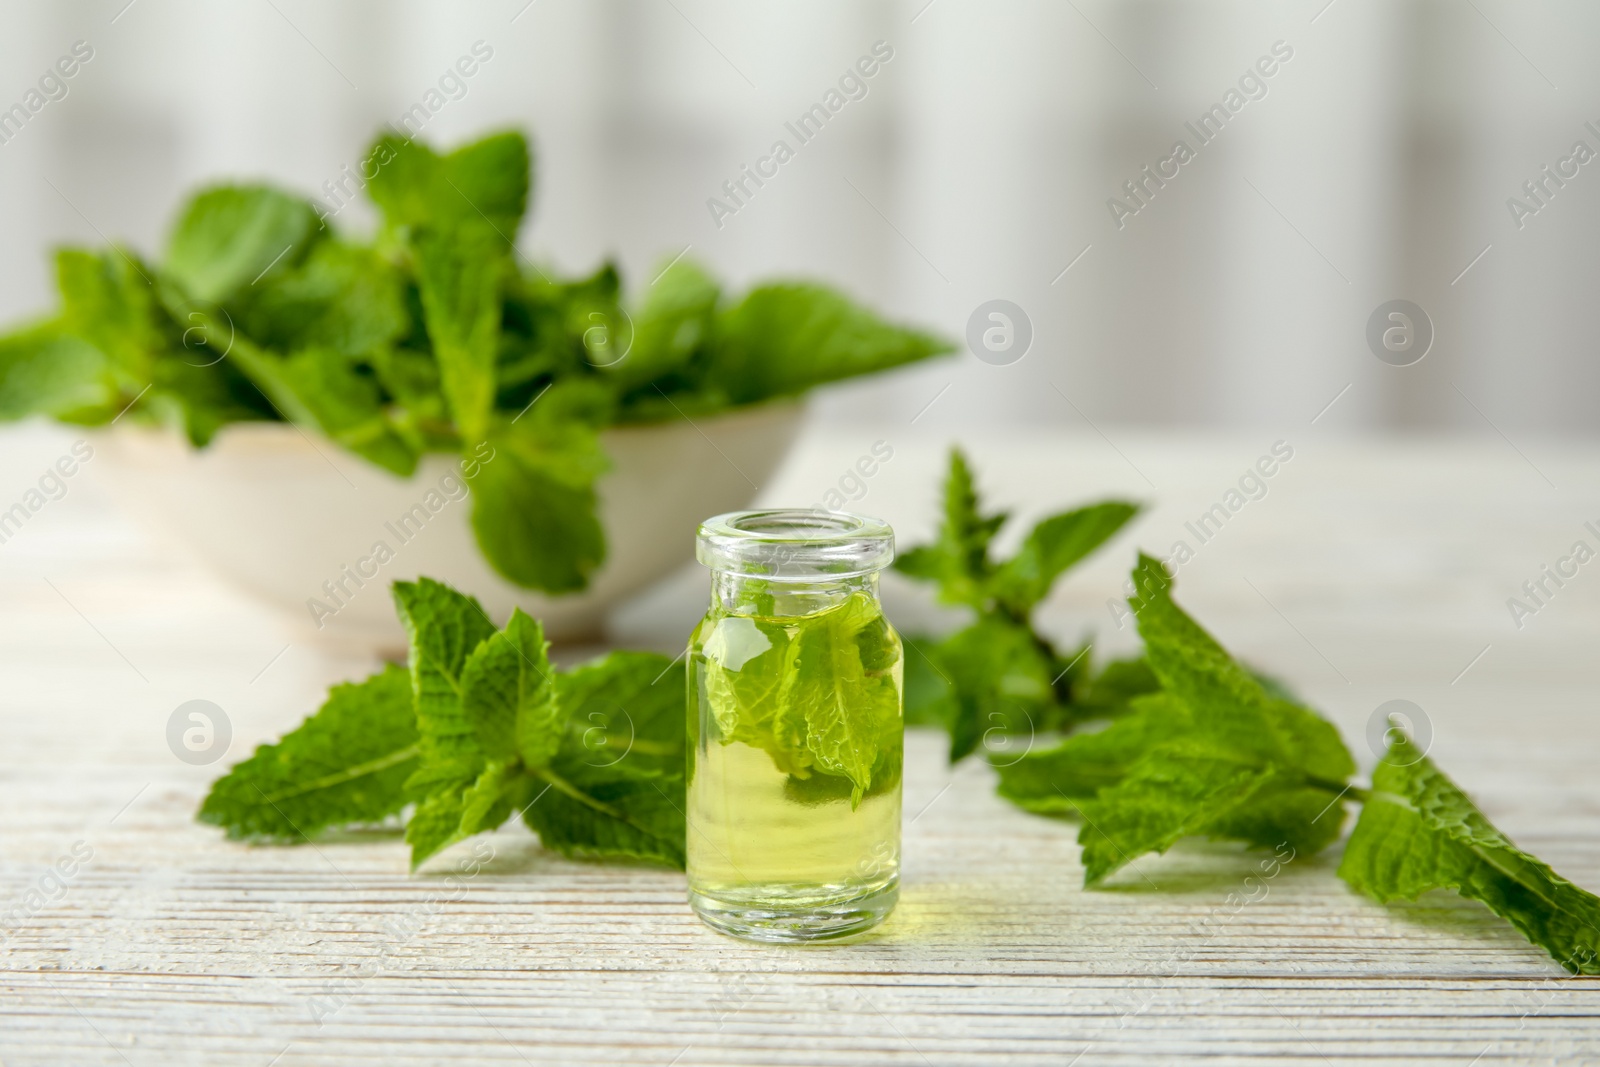 Photo of Bottle of essential oil and mint on table